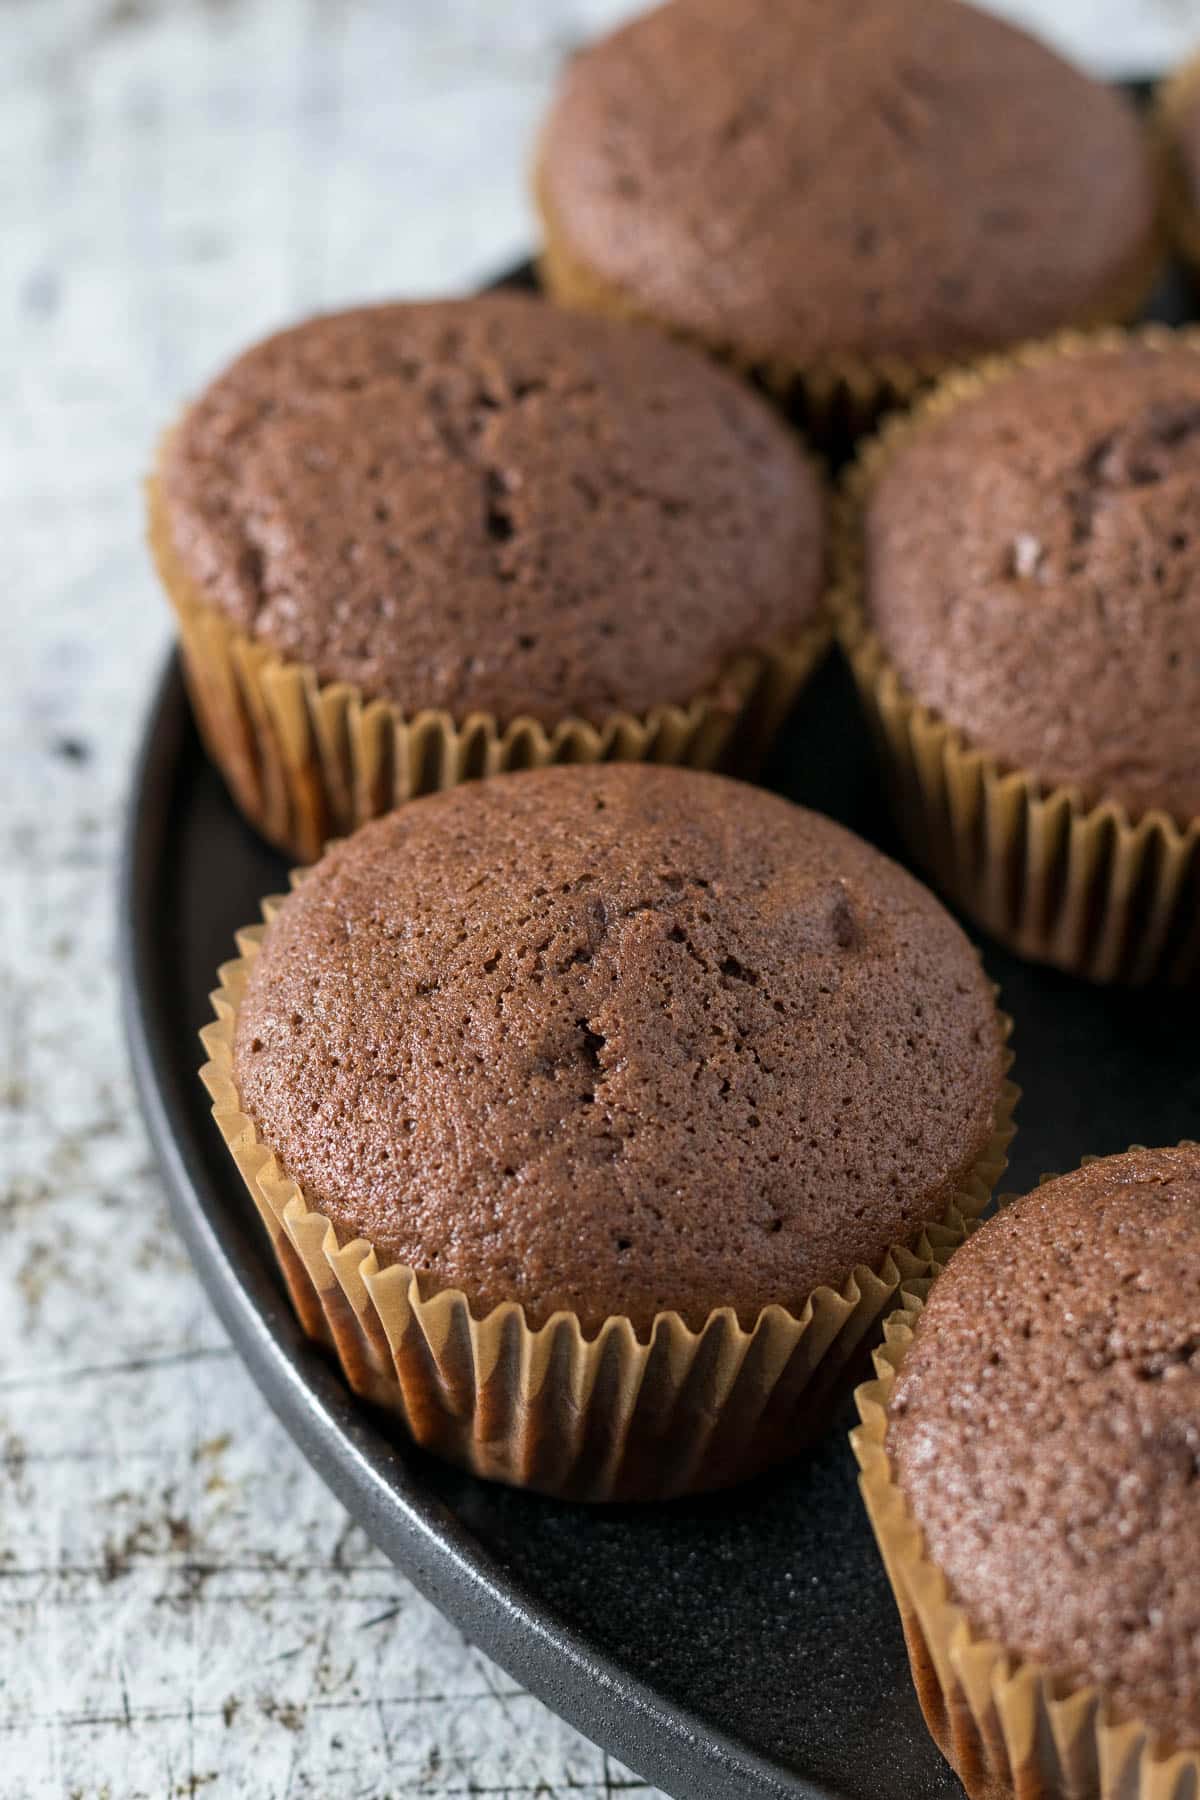 Baked, unfrosted chocolate cupcakes on a plate.